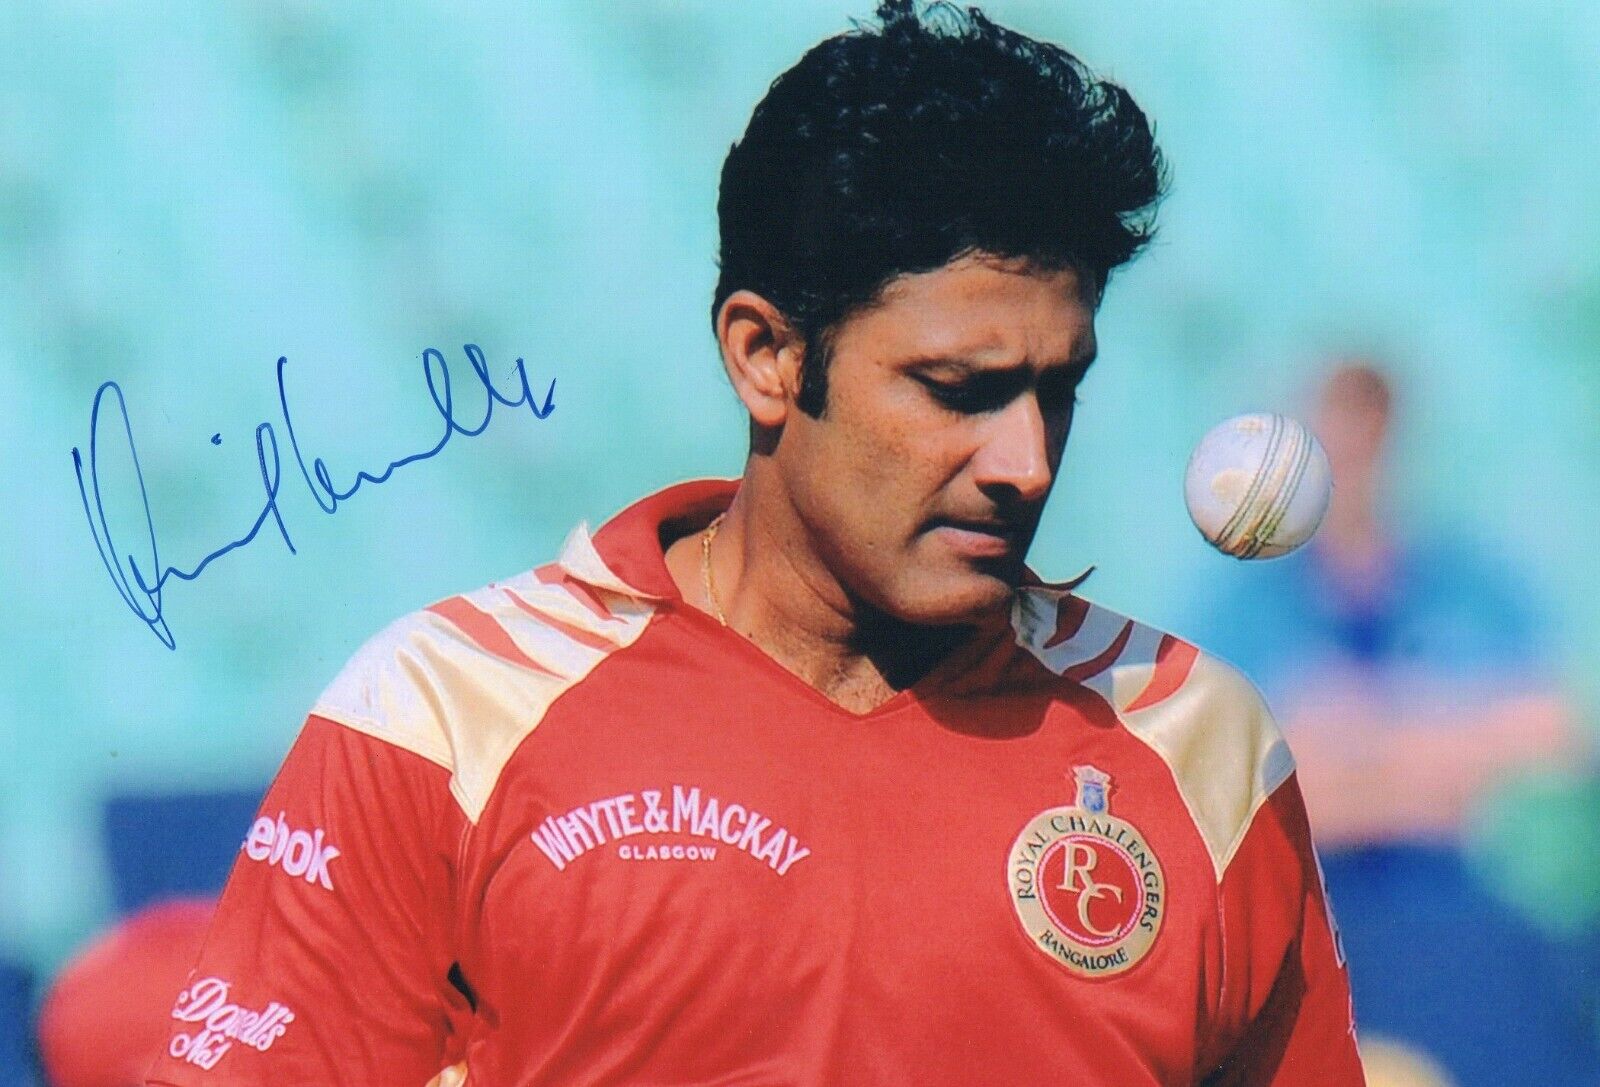 5x7 Original Autographed Photo of Former Indian Cricketer Anil Kumble